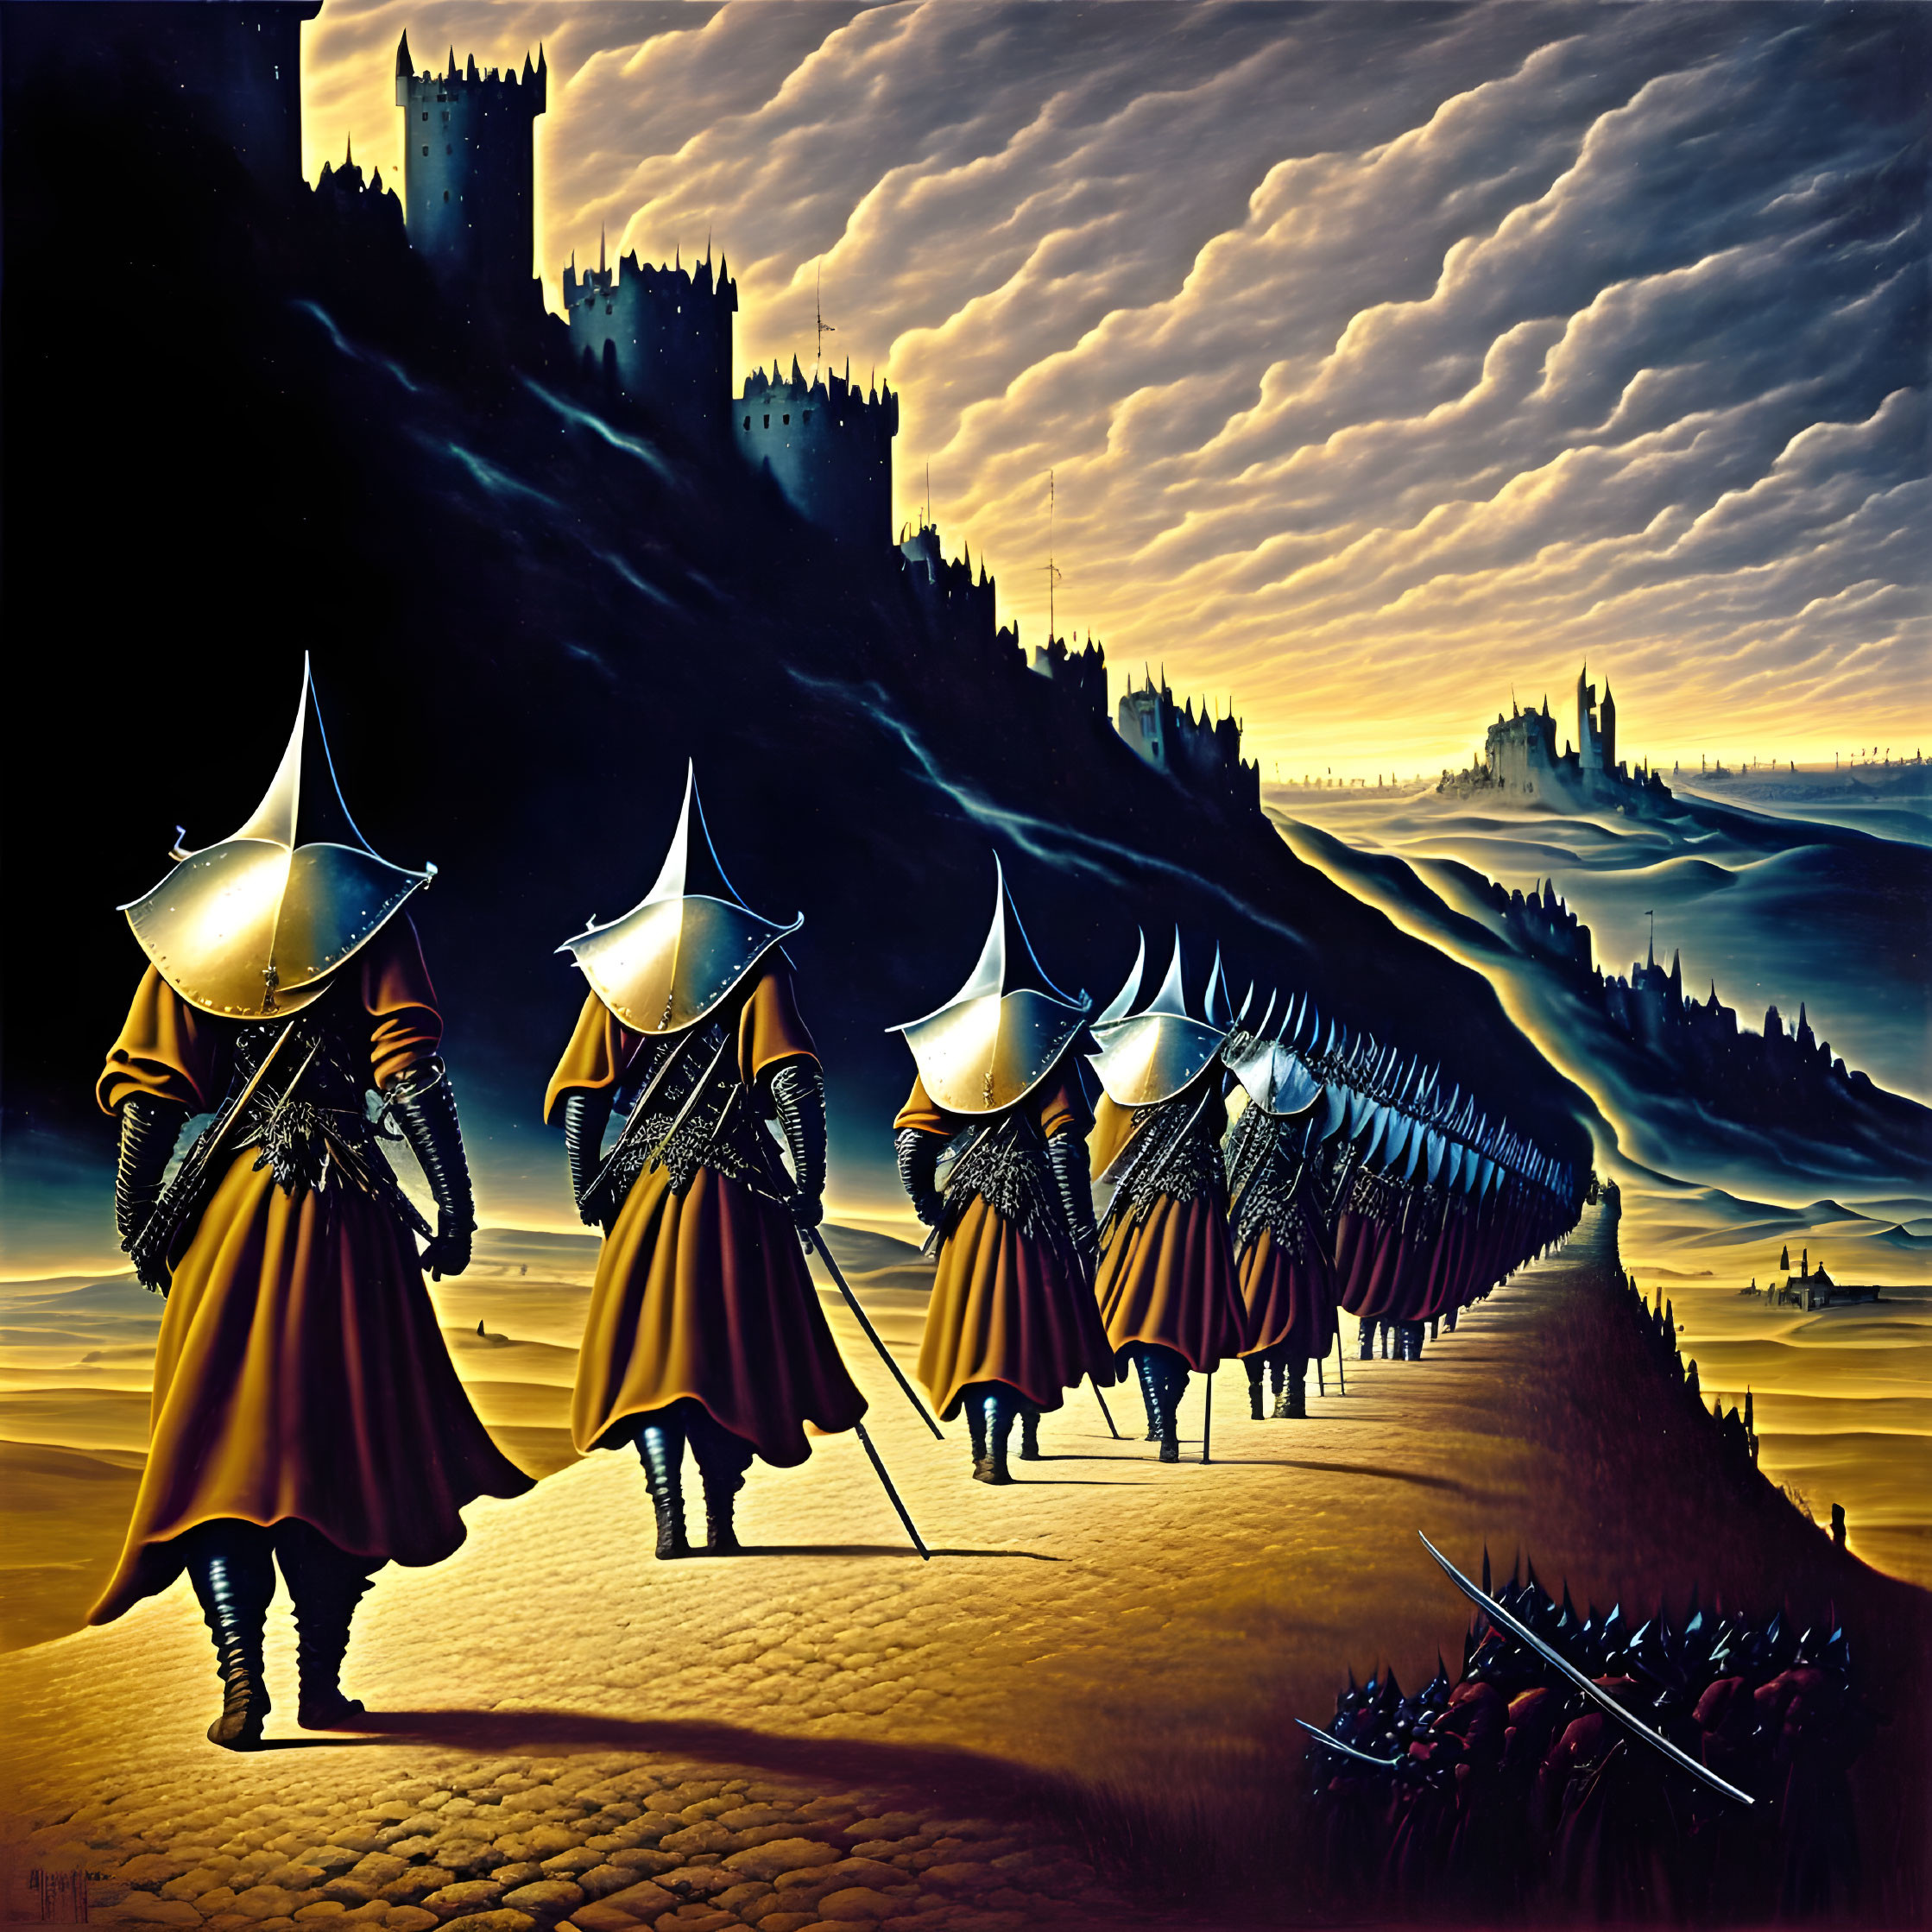 Surrealist painting: Armored figures marching to castles under cloudy sky